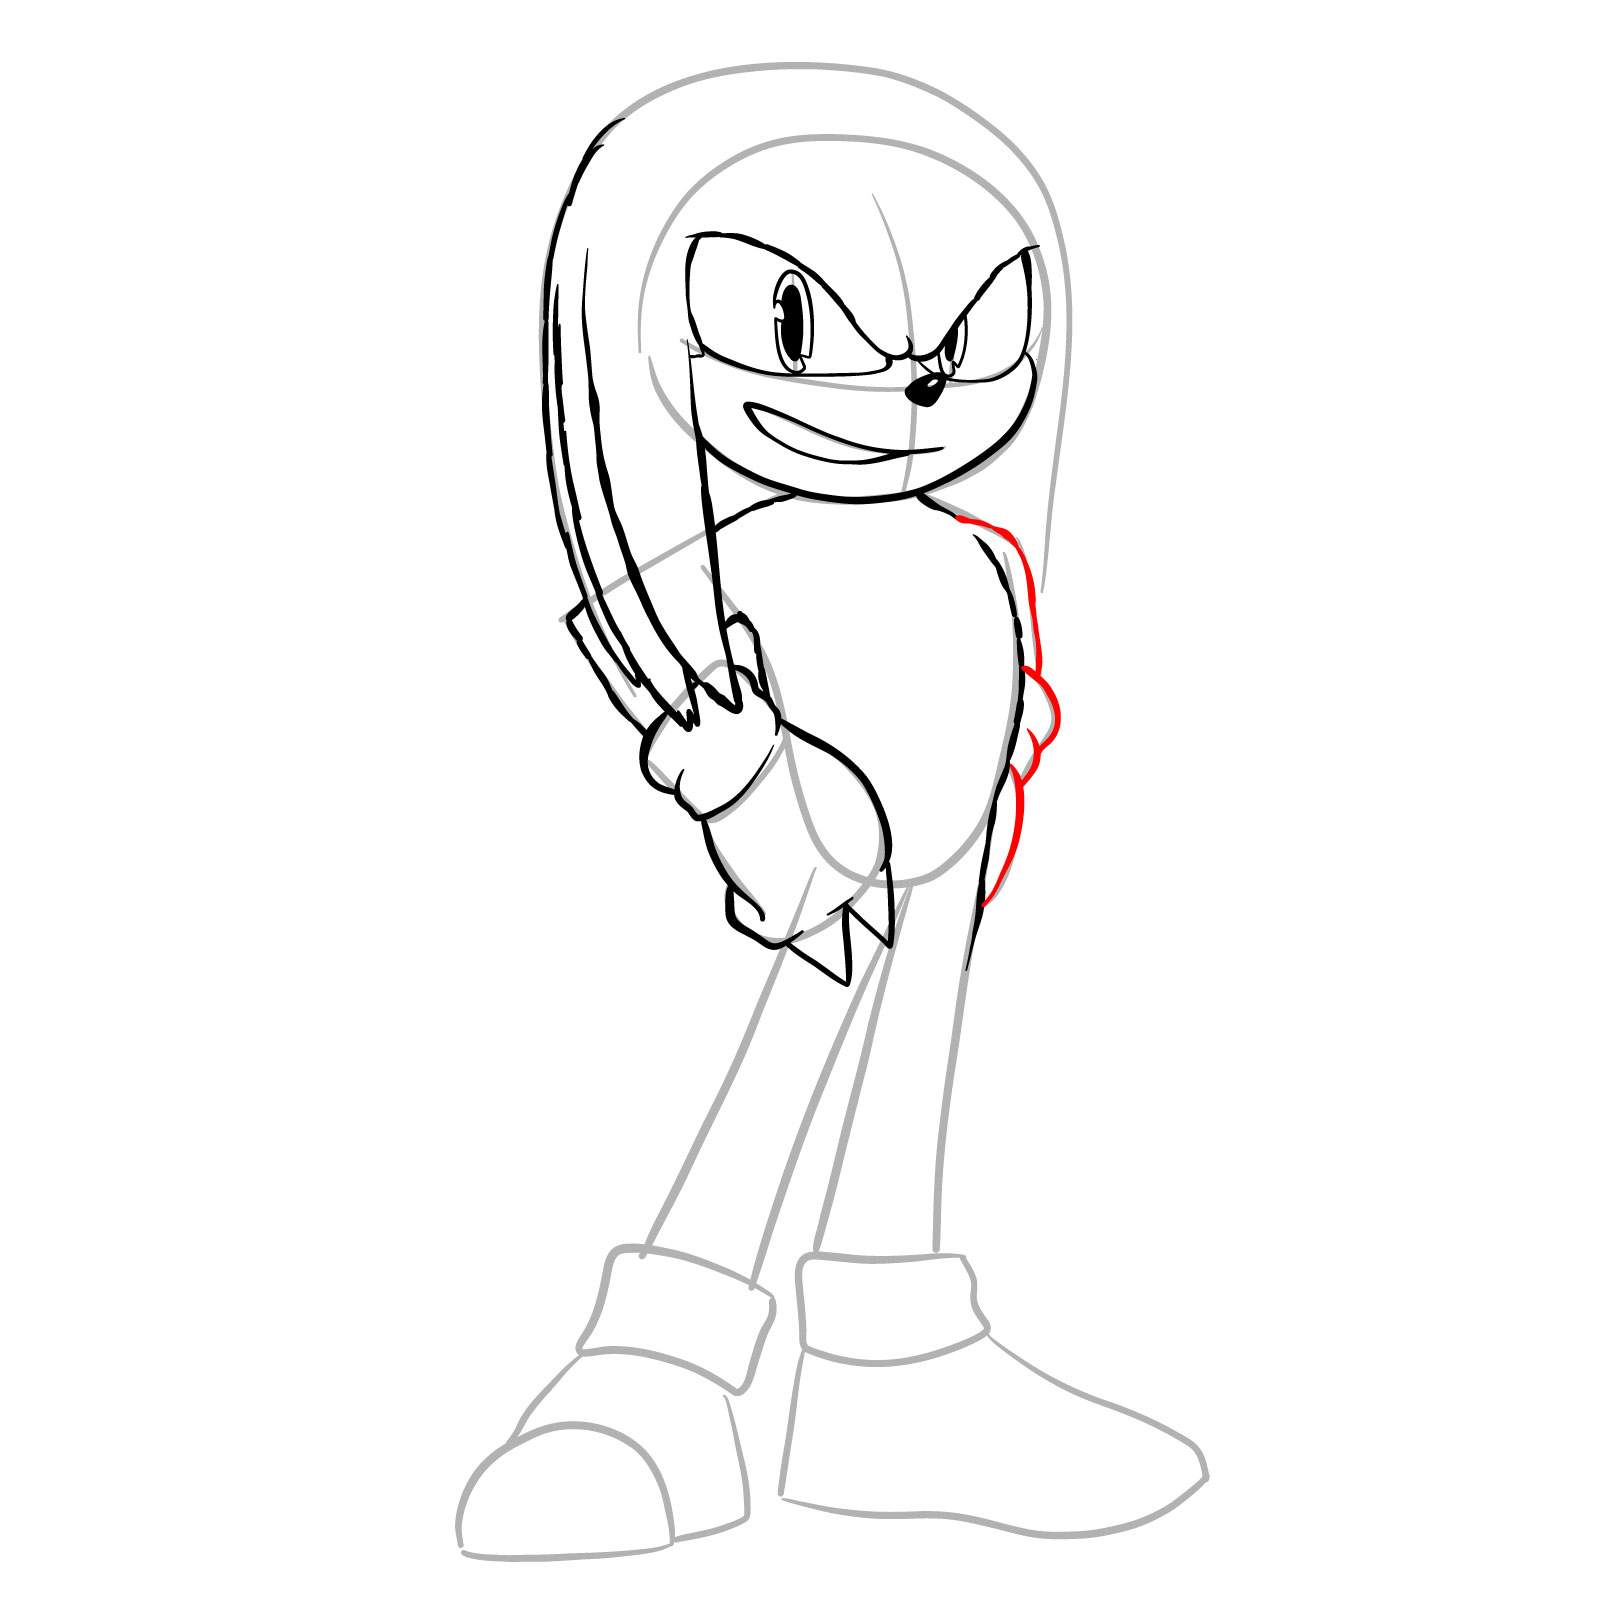 How to draw Knuckles from the movie - step 16